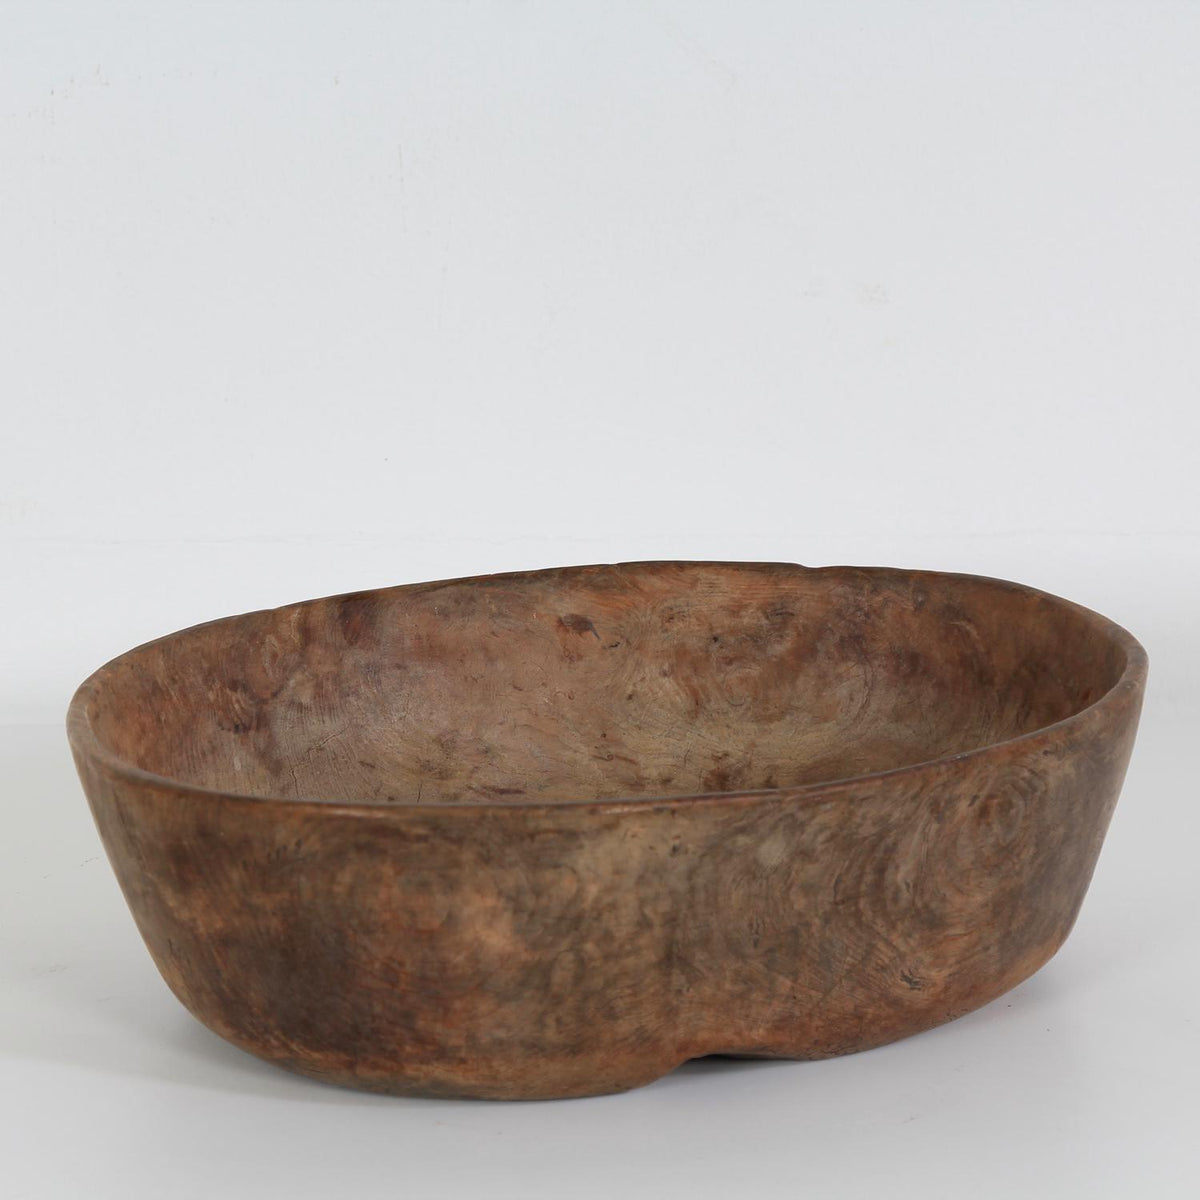 Collection of Two Early 19thC  Dug Out  Primitive Swedish Root Bowls